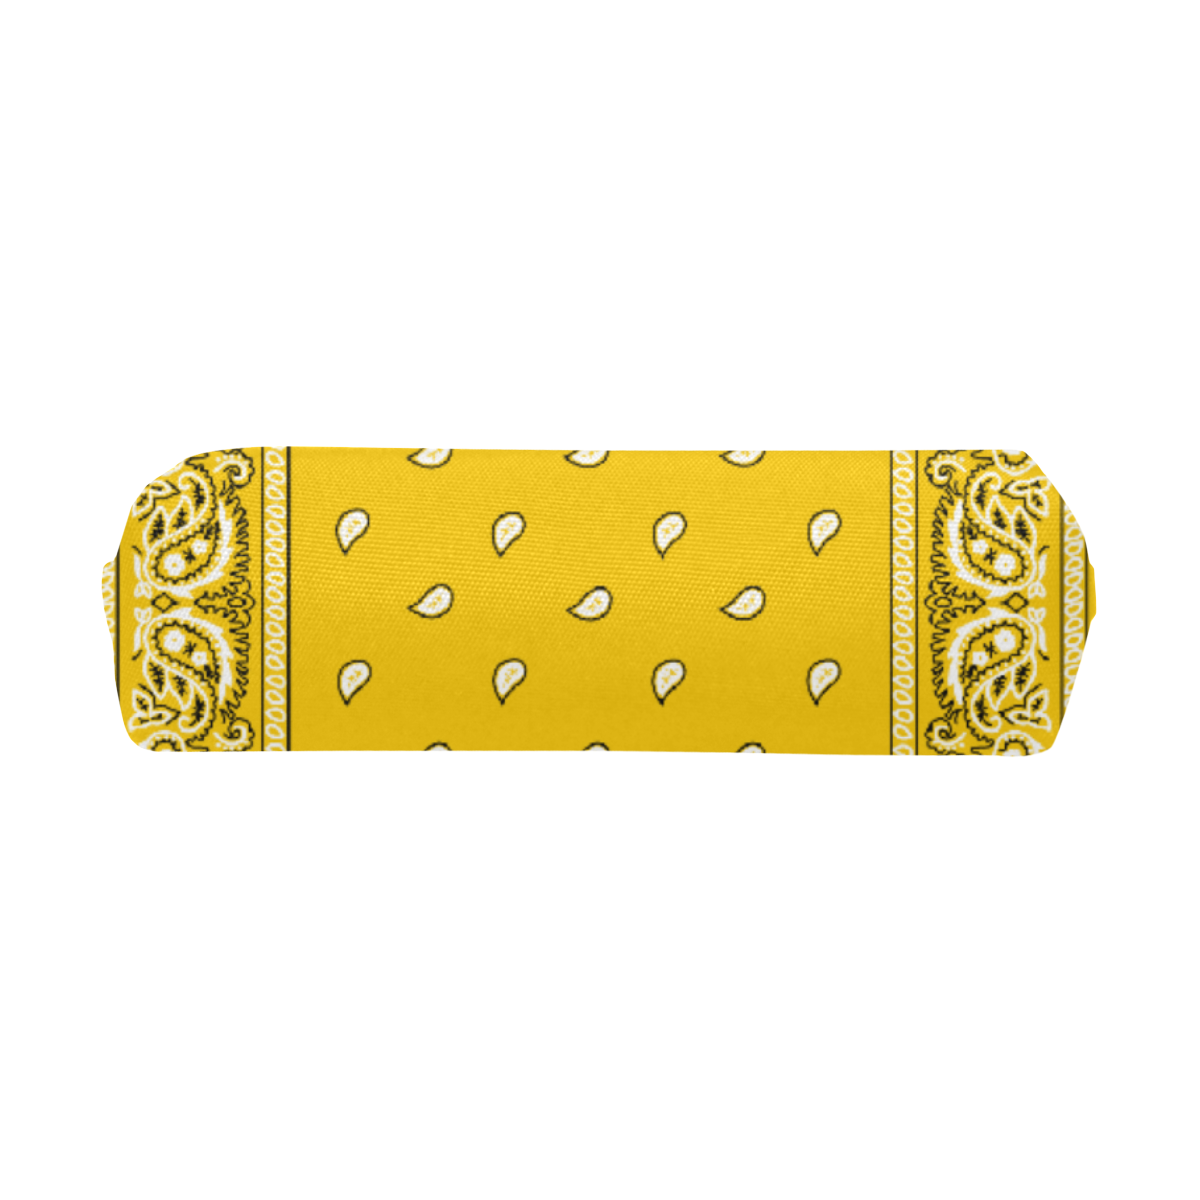 KERCHIEF PATTERN YELLOW Pencil Pouch/Small (Model 1681)